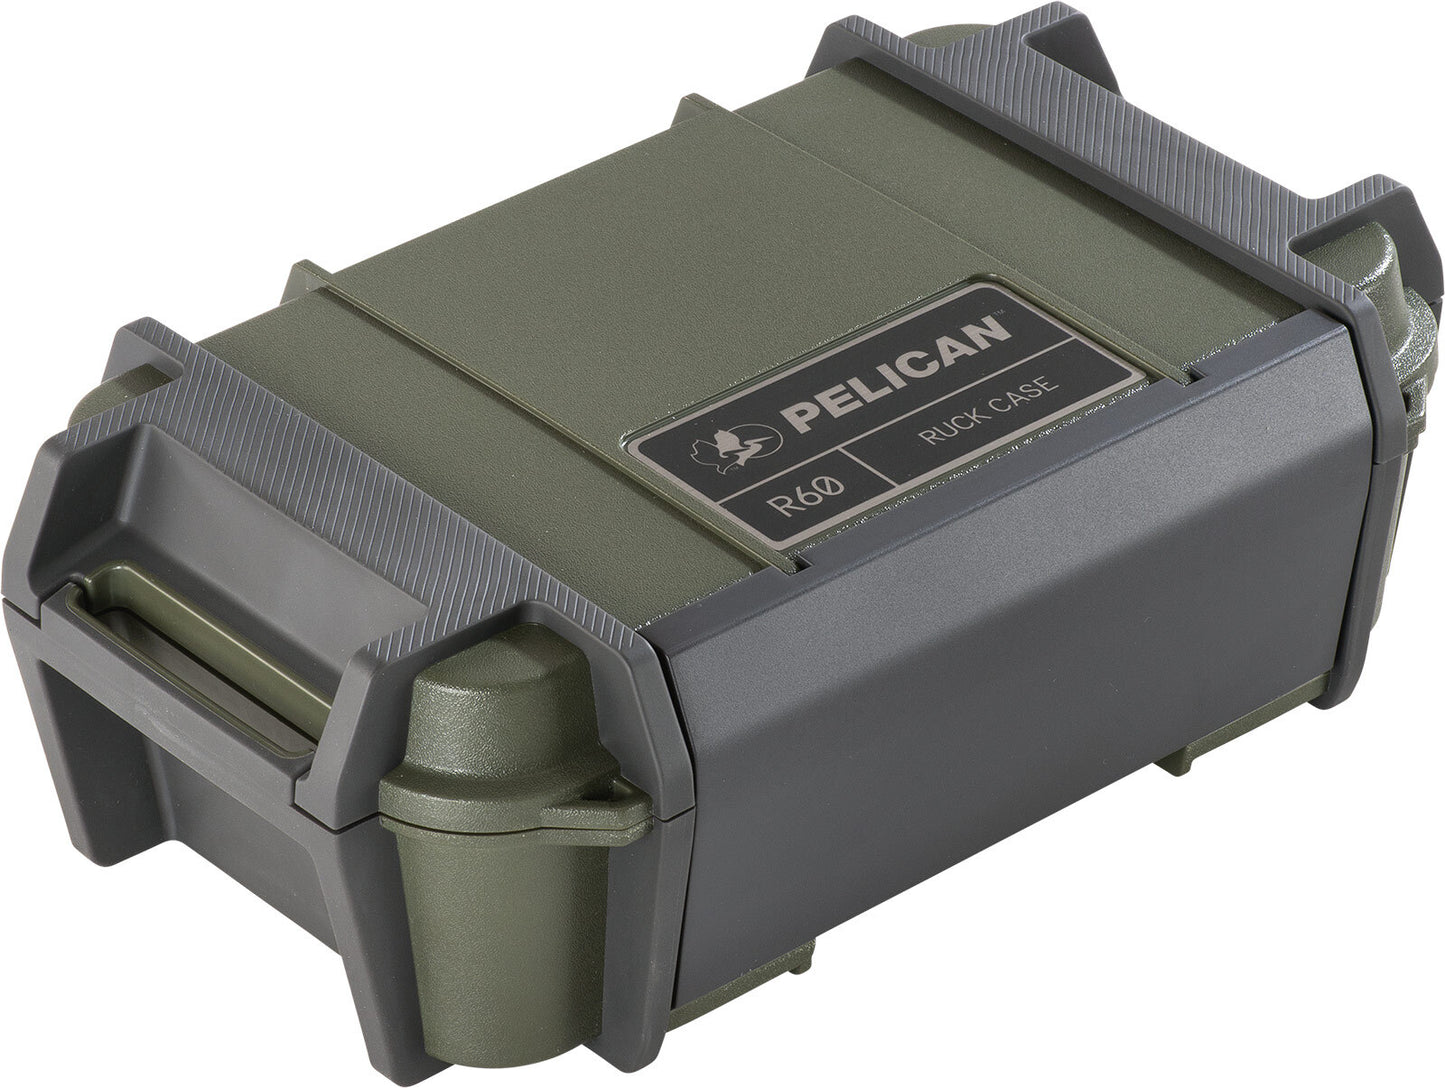 PELICAN RUCK CASE R60 PERSONAL UTILITY